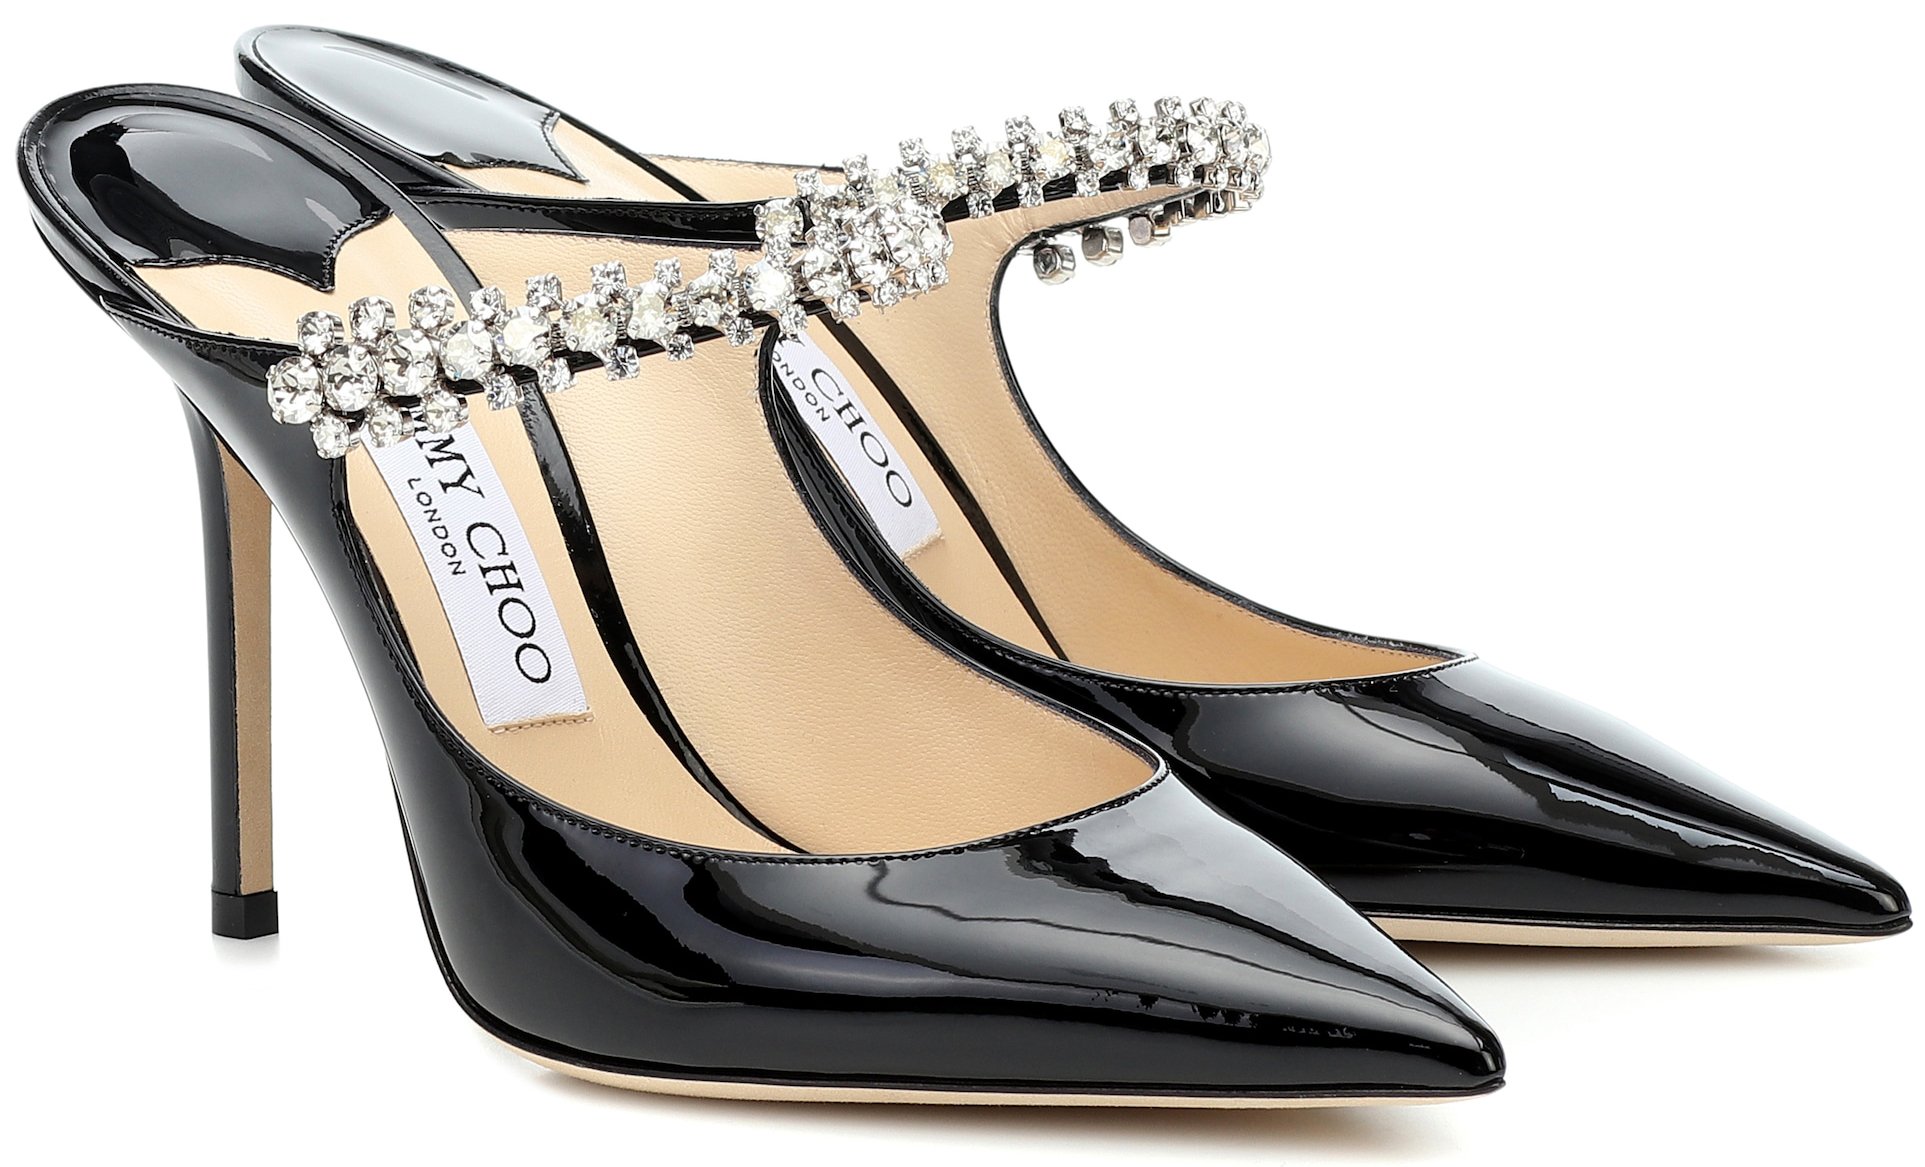 Jimmy Choo's Bing mules fuse sophistication and femininity with crystal-embellished straps and patent leather uppers